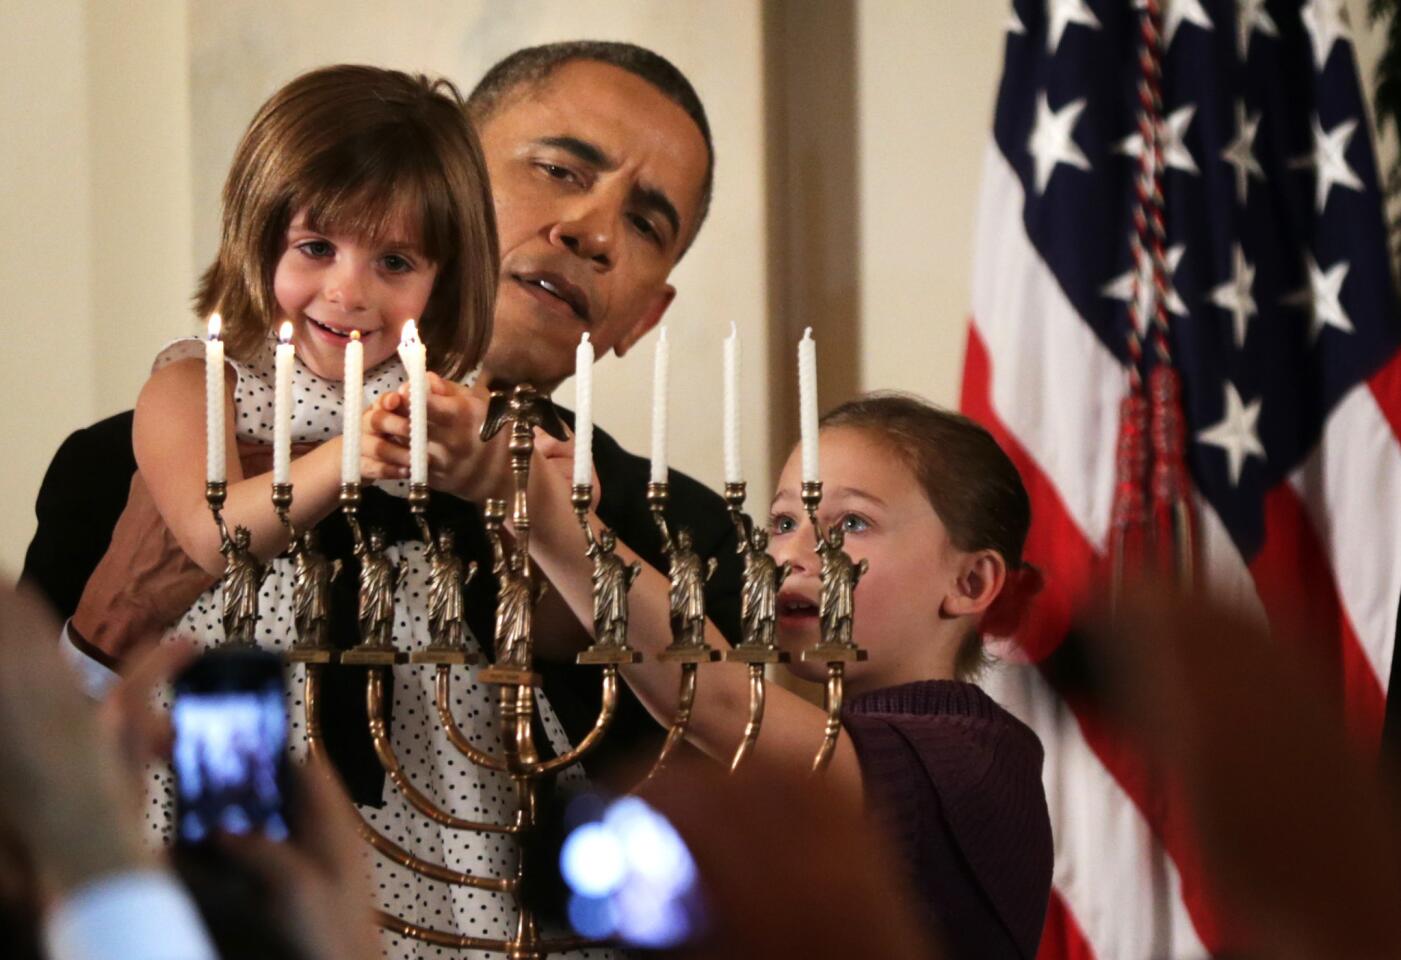 President Barack Obama holds up 4-year-old Kylie Schmitter, left, to light a menorah as Kylie's sister Lainey looks on during a Hanukkah reception at the White House in December 2013.